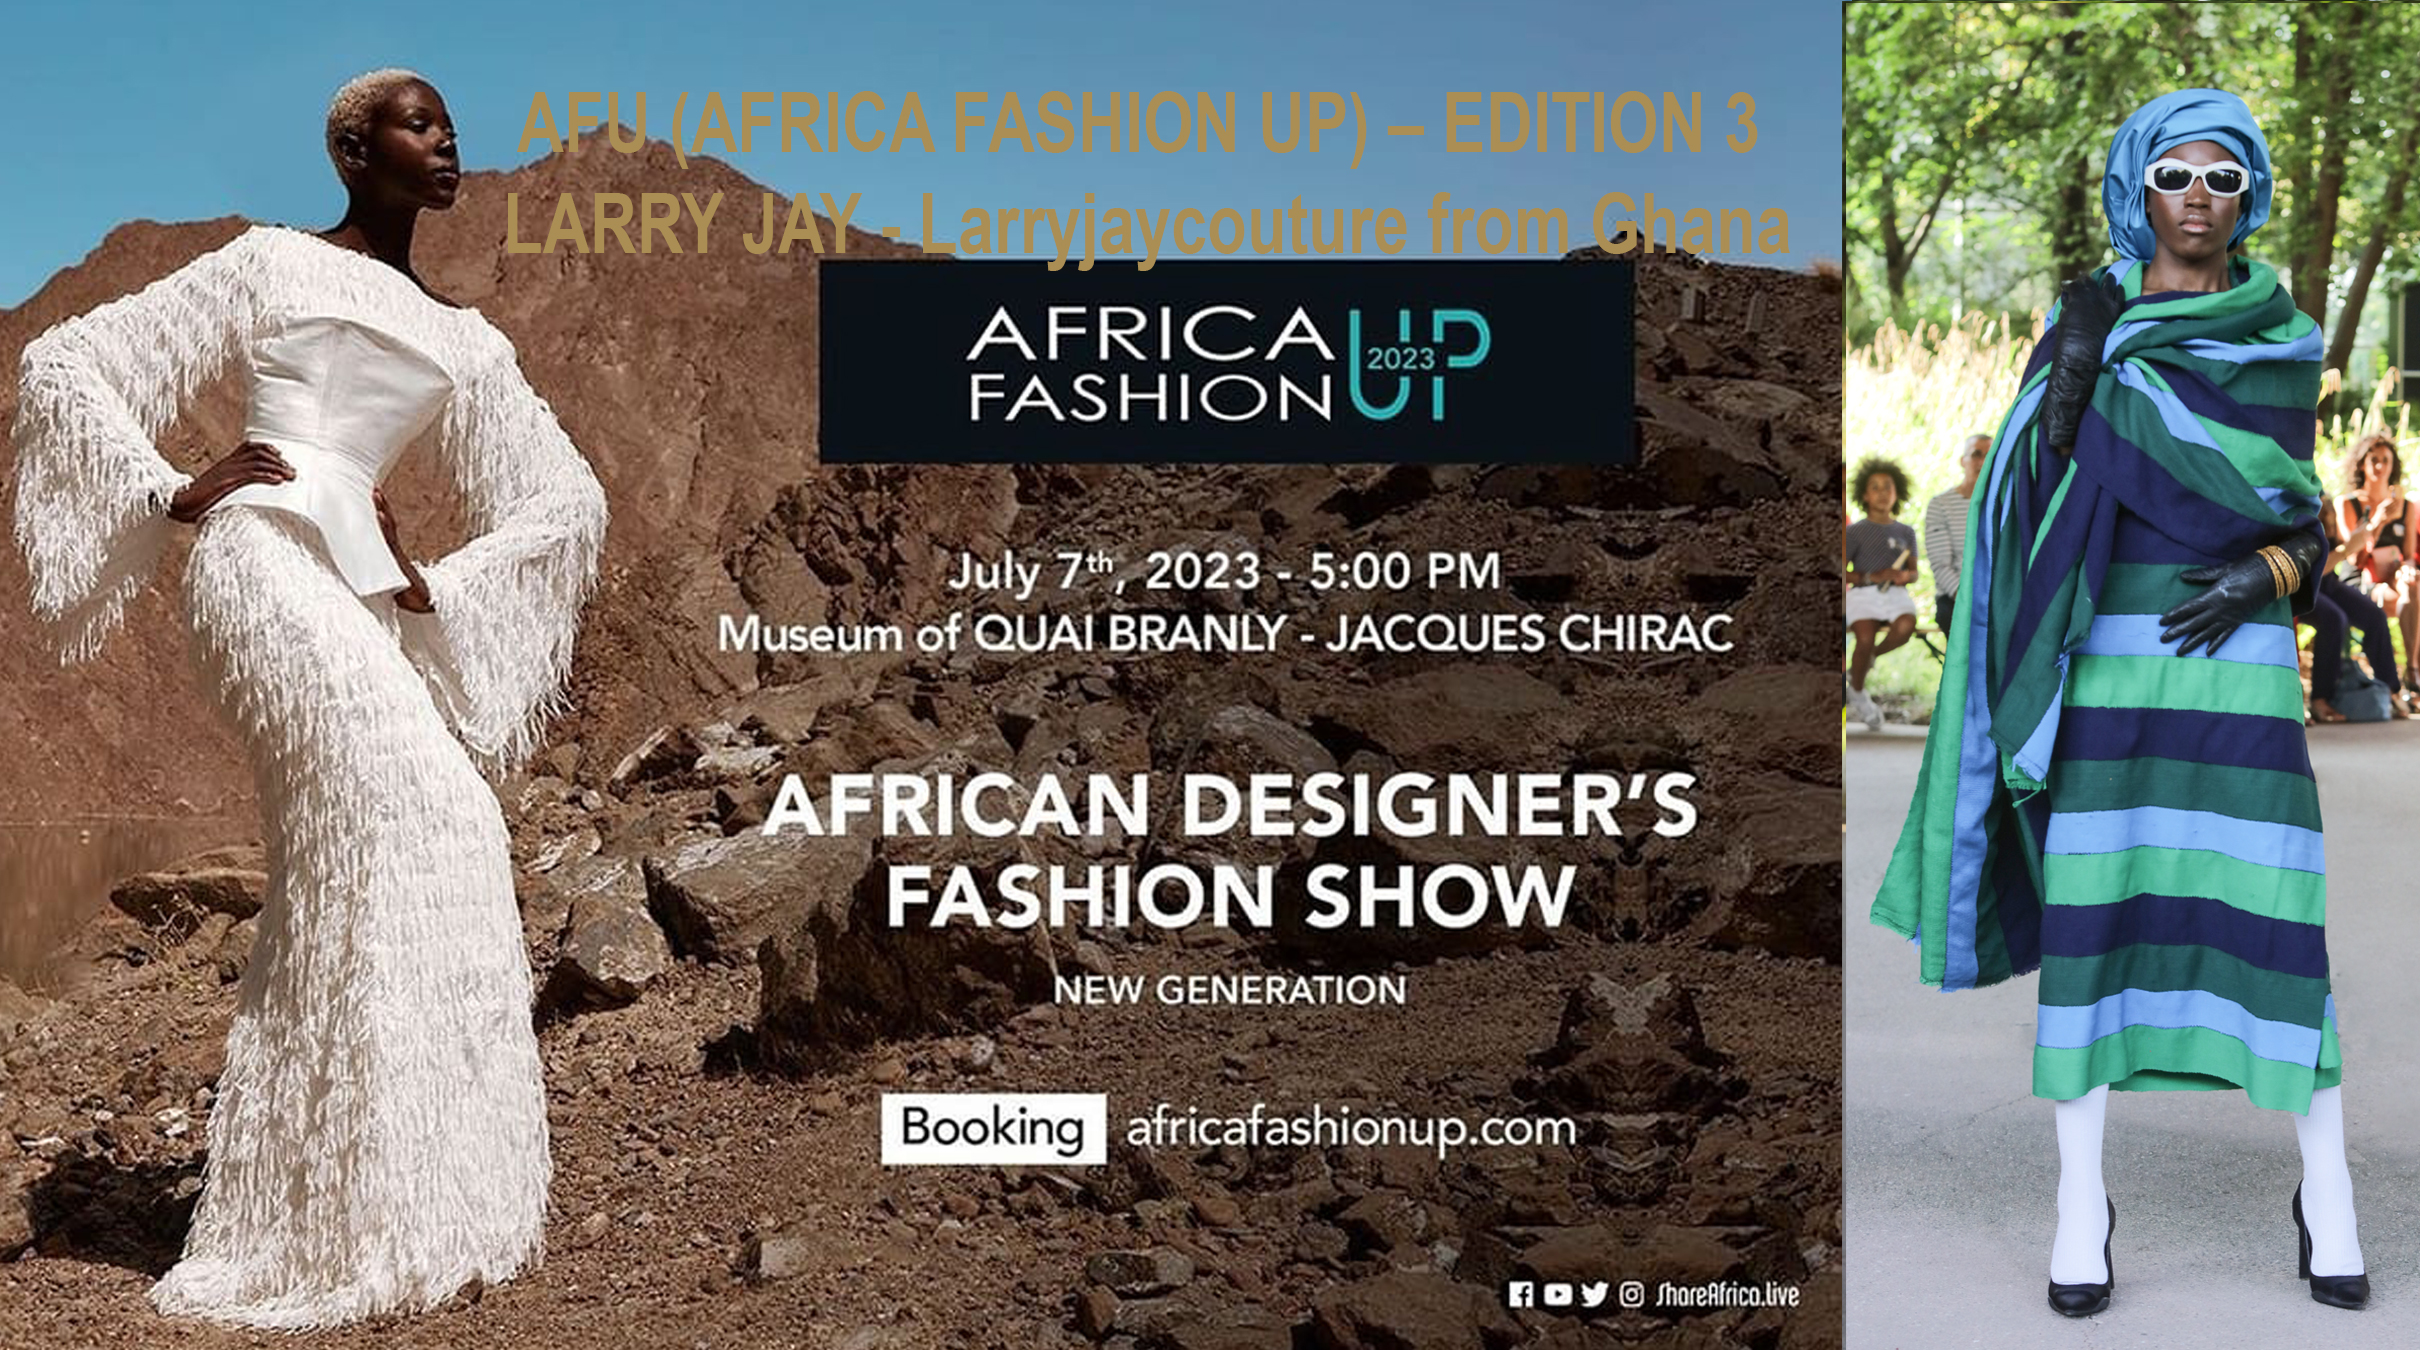 AFRICA-VOGUE-COVER-AFU-AFRICA-FASHION-UP-EDITION-3-LARRY-JAY-Larryjaycouture-from-Ghana-DN-AFRICA-Media-Partner